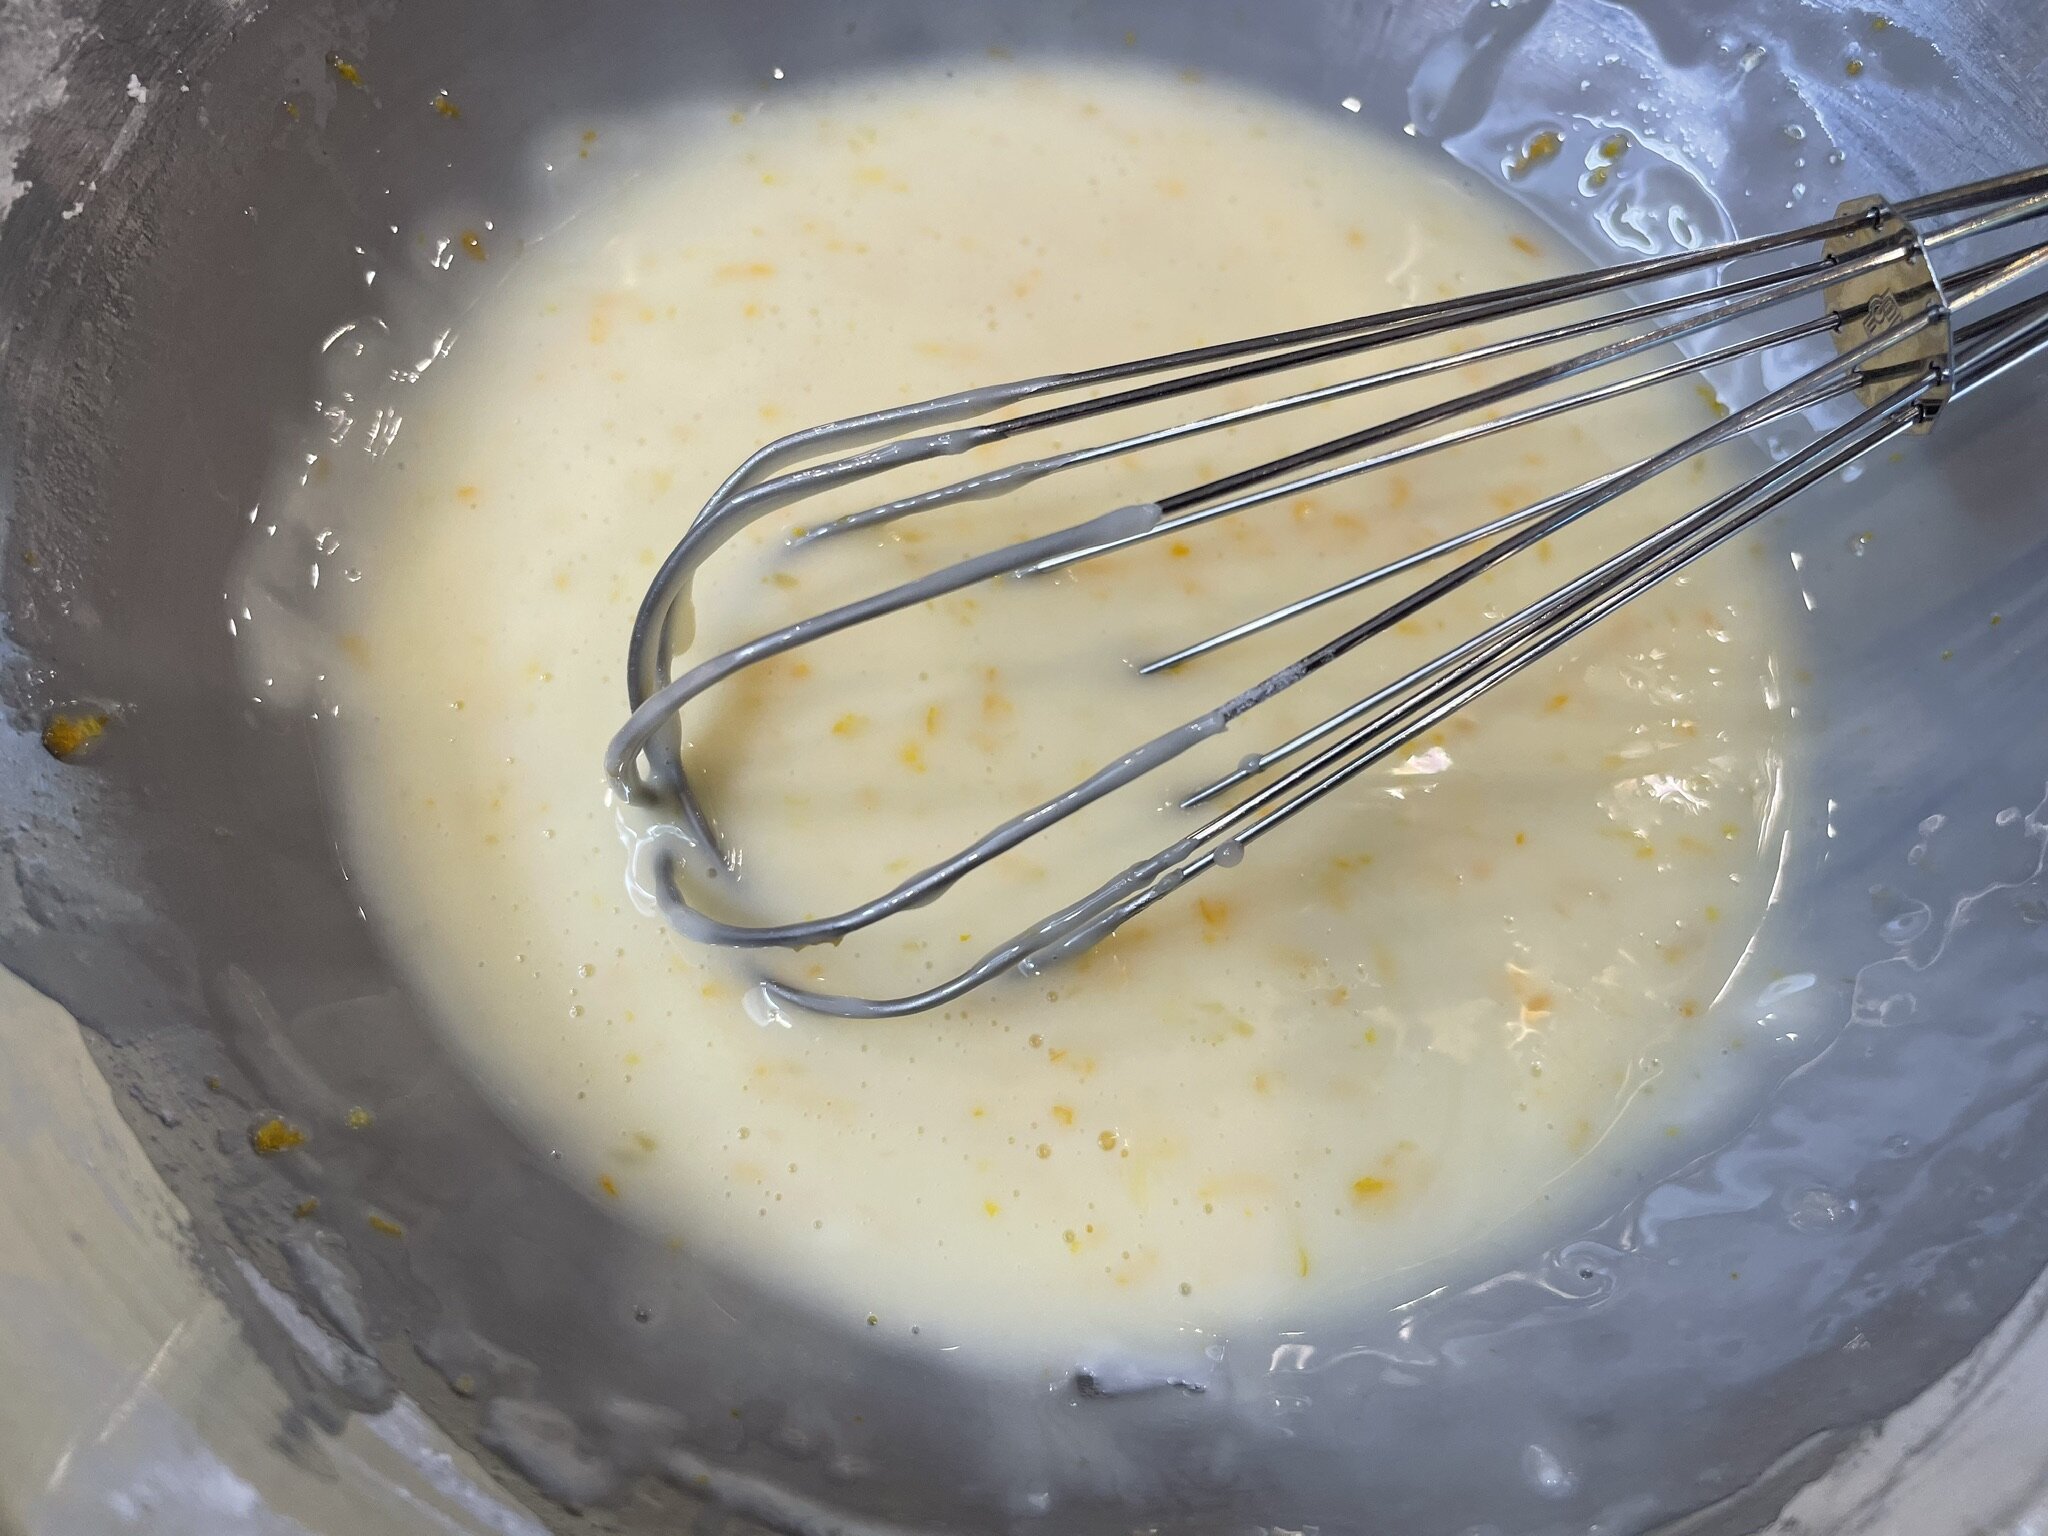 d) Whisk to combine.